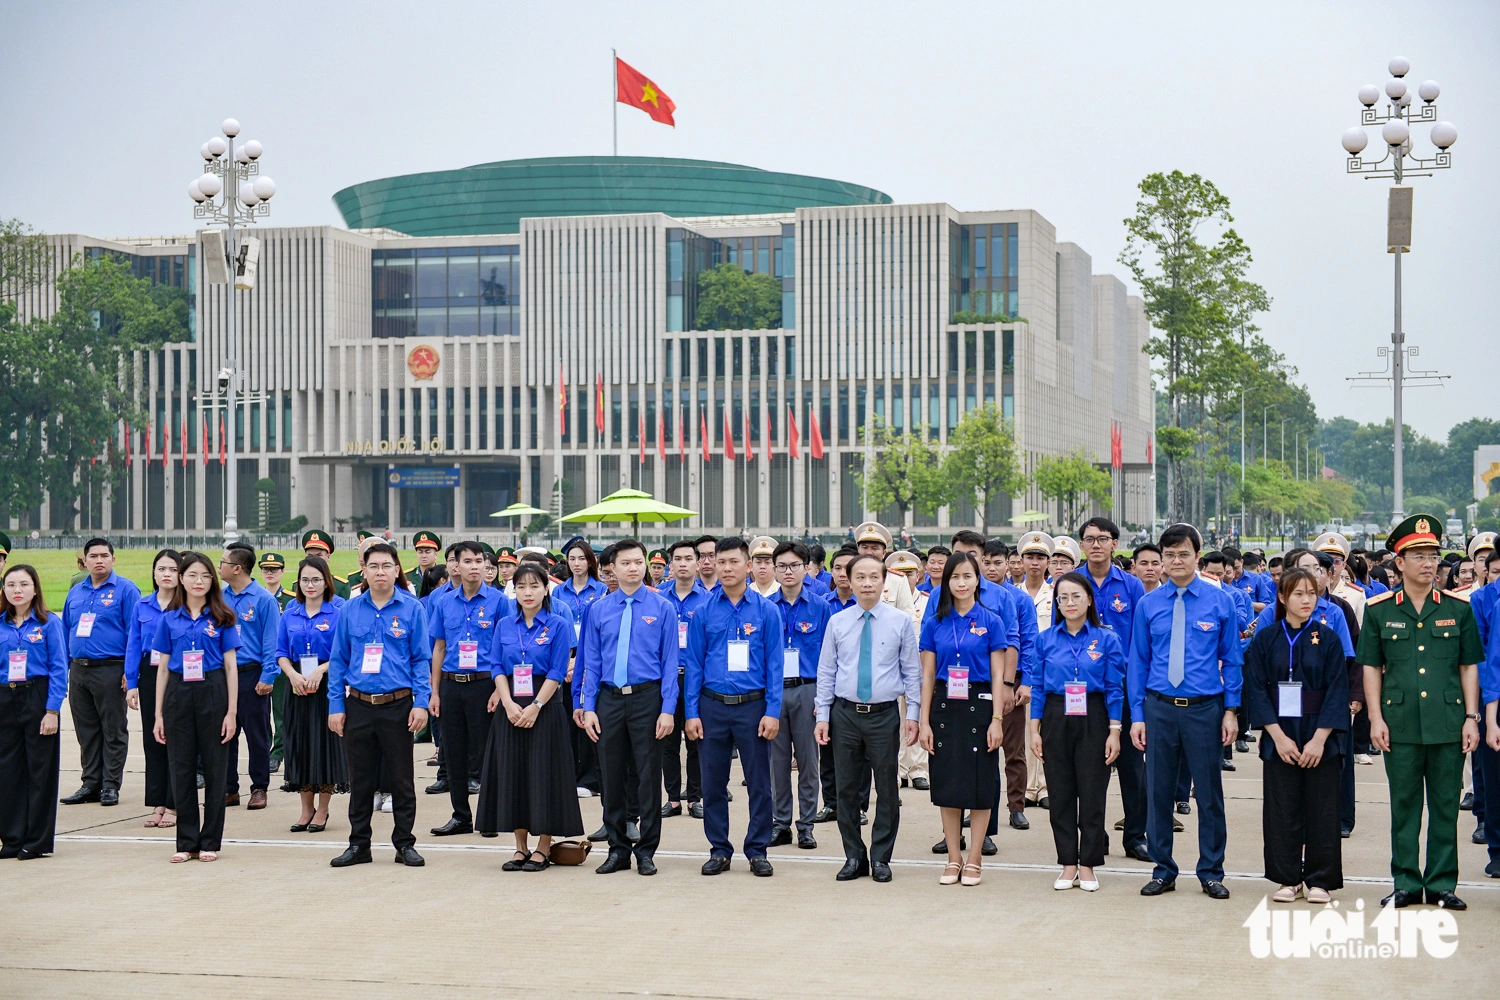 The delegates held a flag-raising ceremony and told Uncle Ho about their achievements.